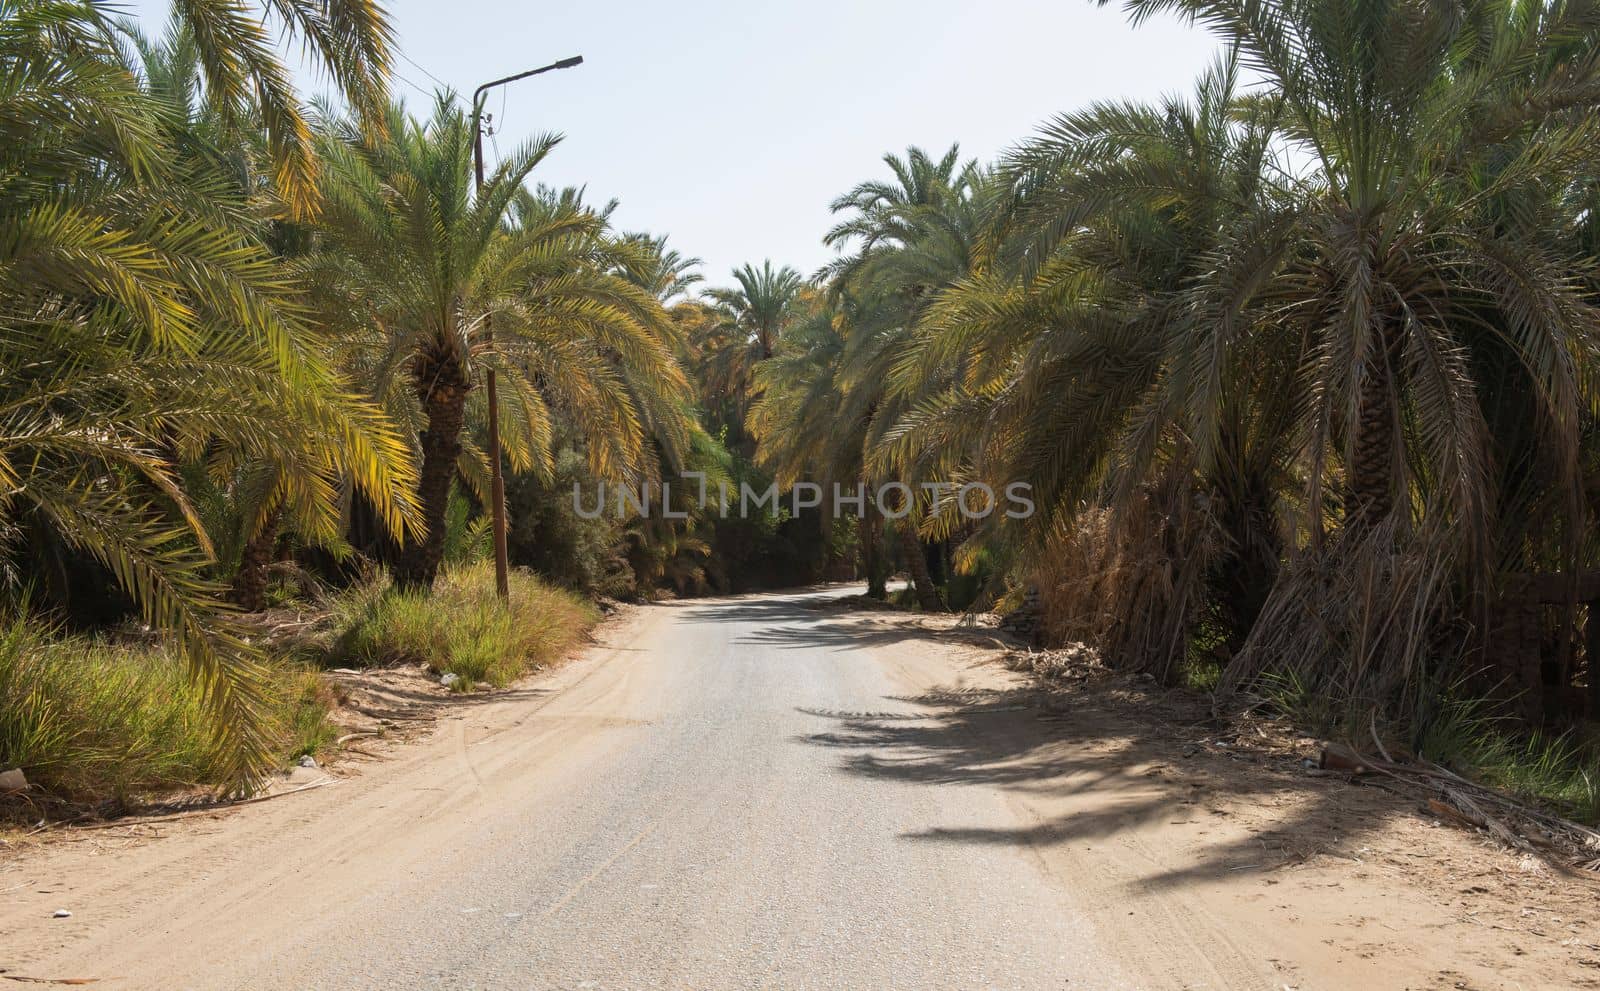 Tarmac road through rural african countryside egyptian date palm tree farm in remote village